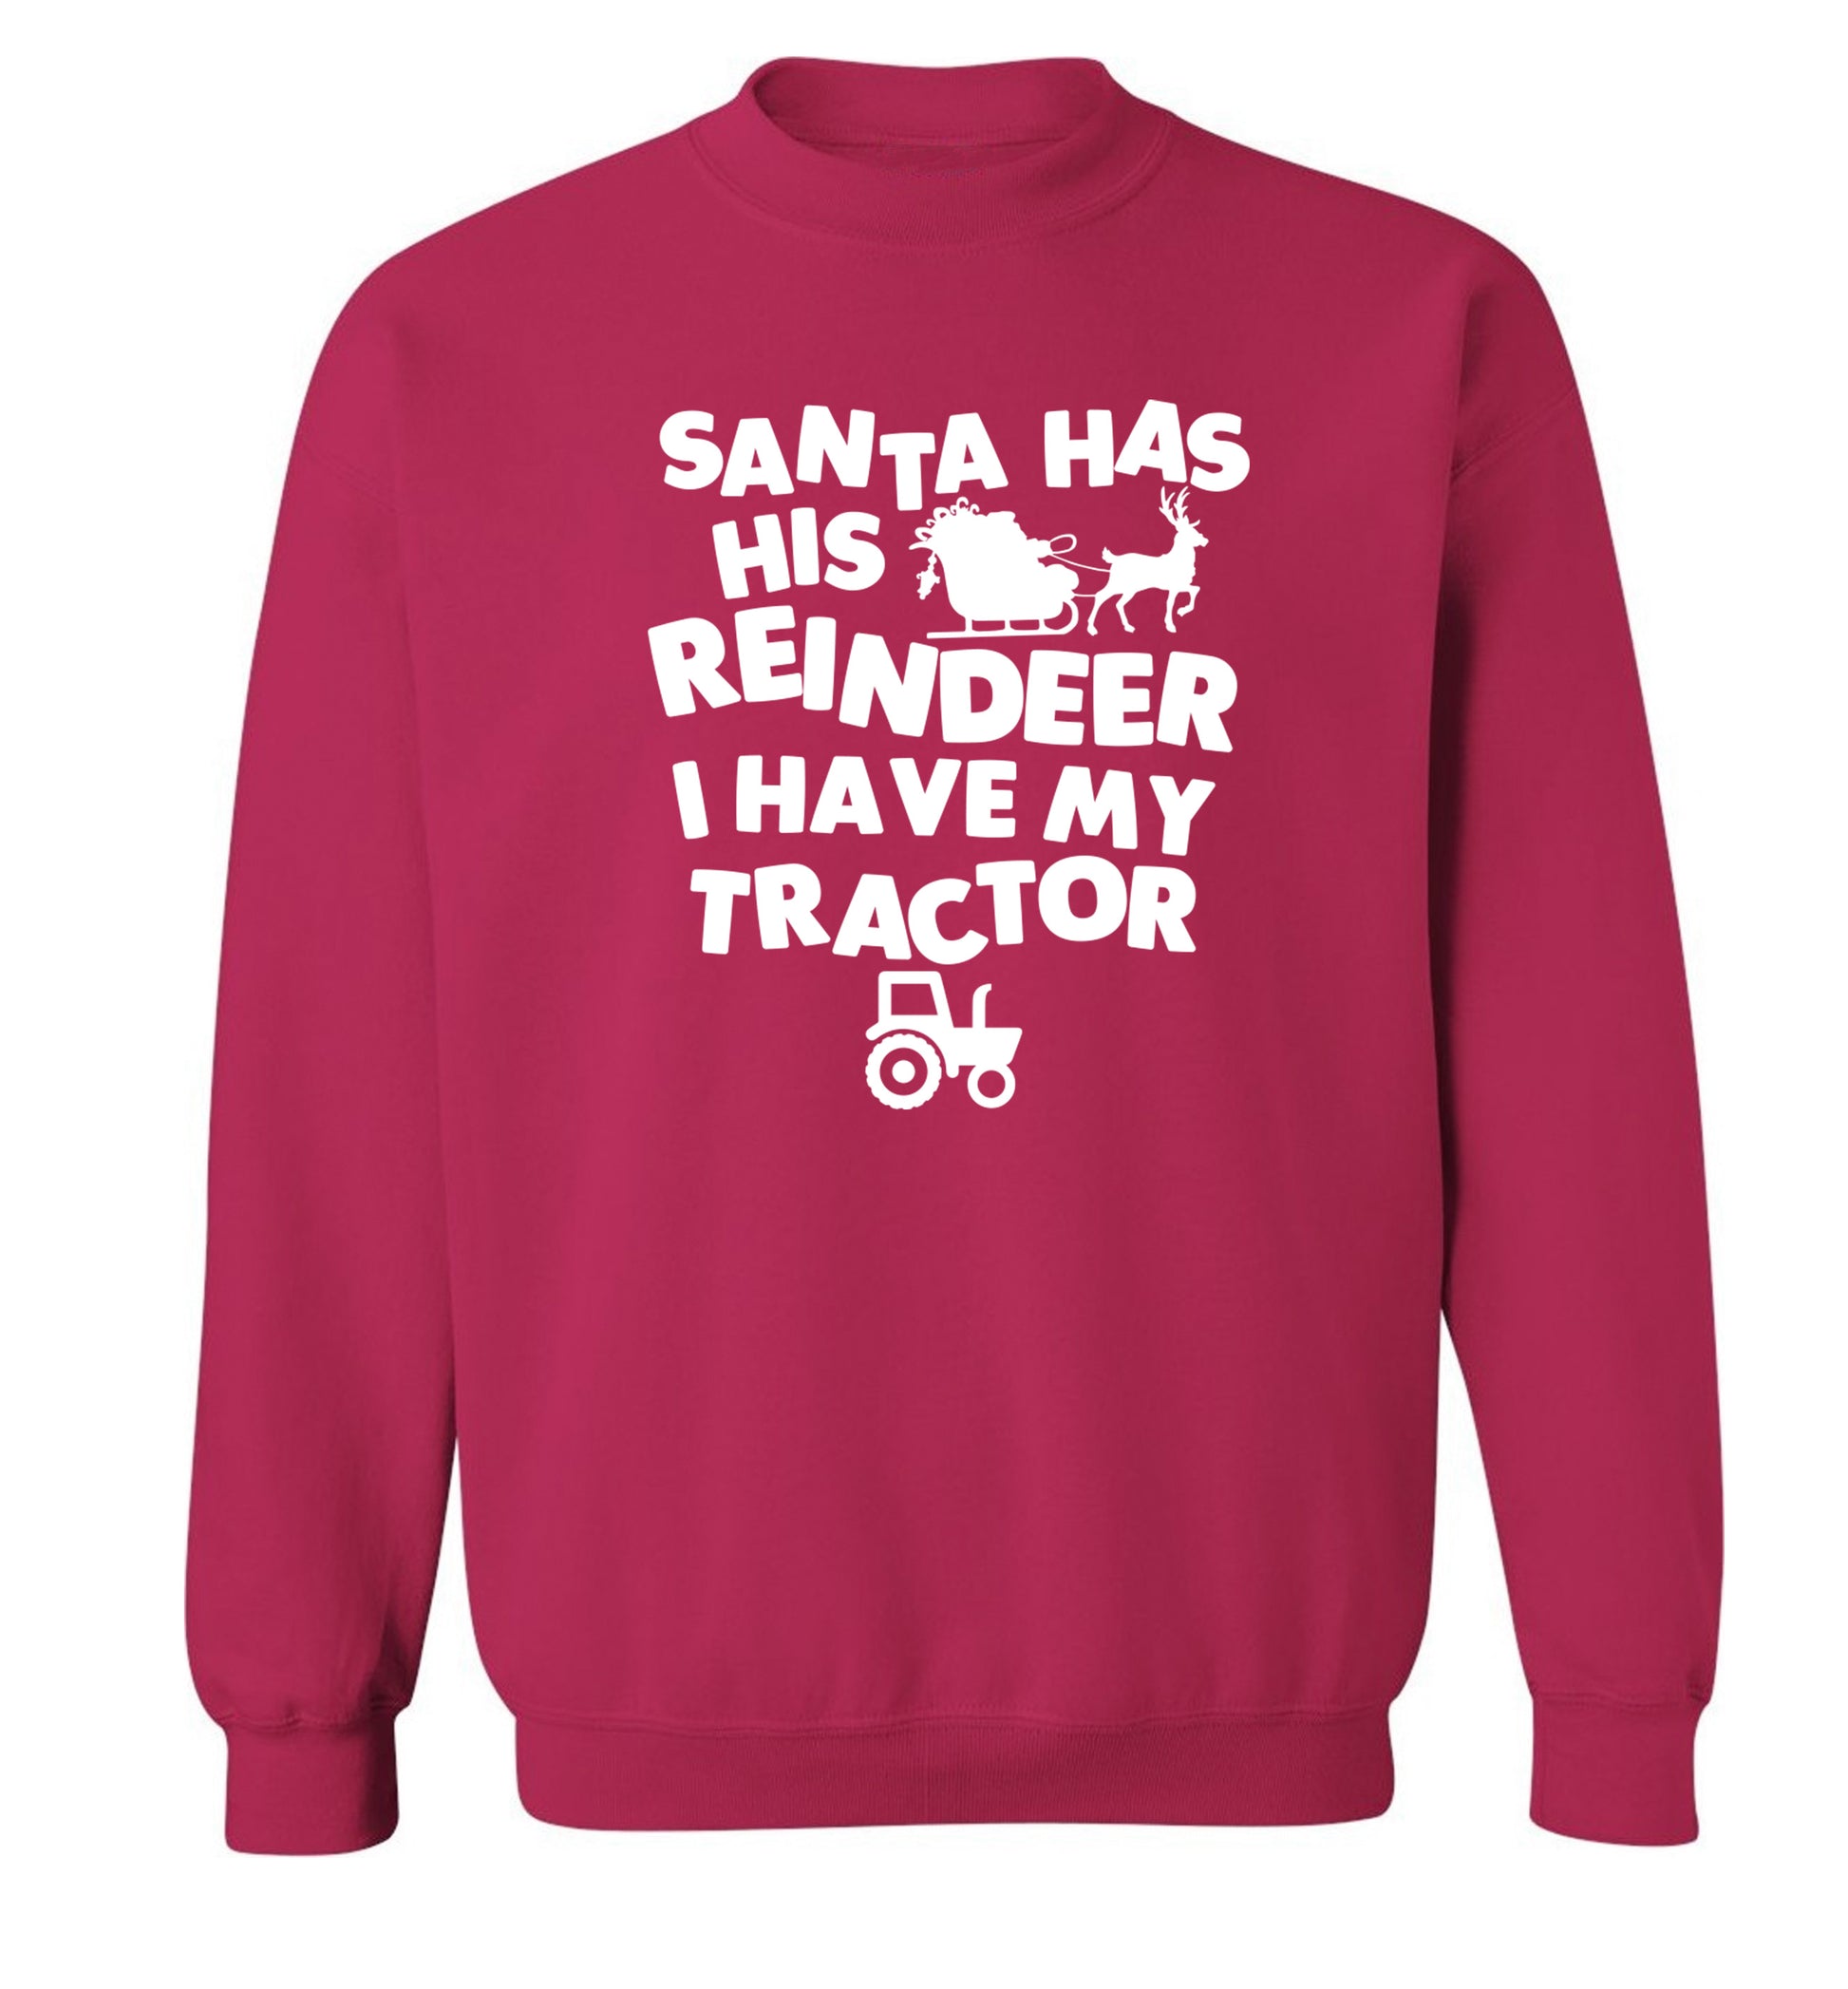 Santa has his reindeer I have my tractor Adult's unisex pink Sweater 2XL